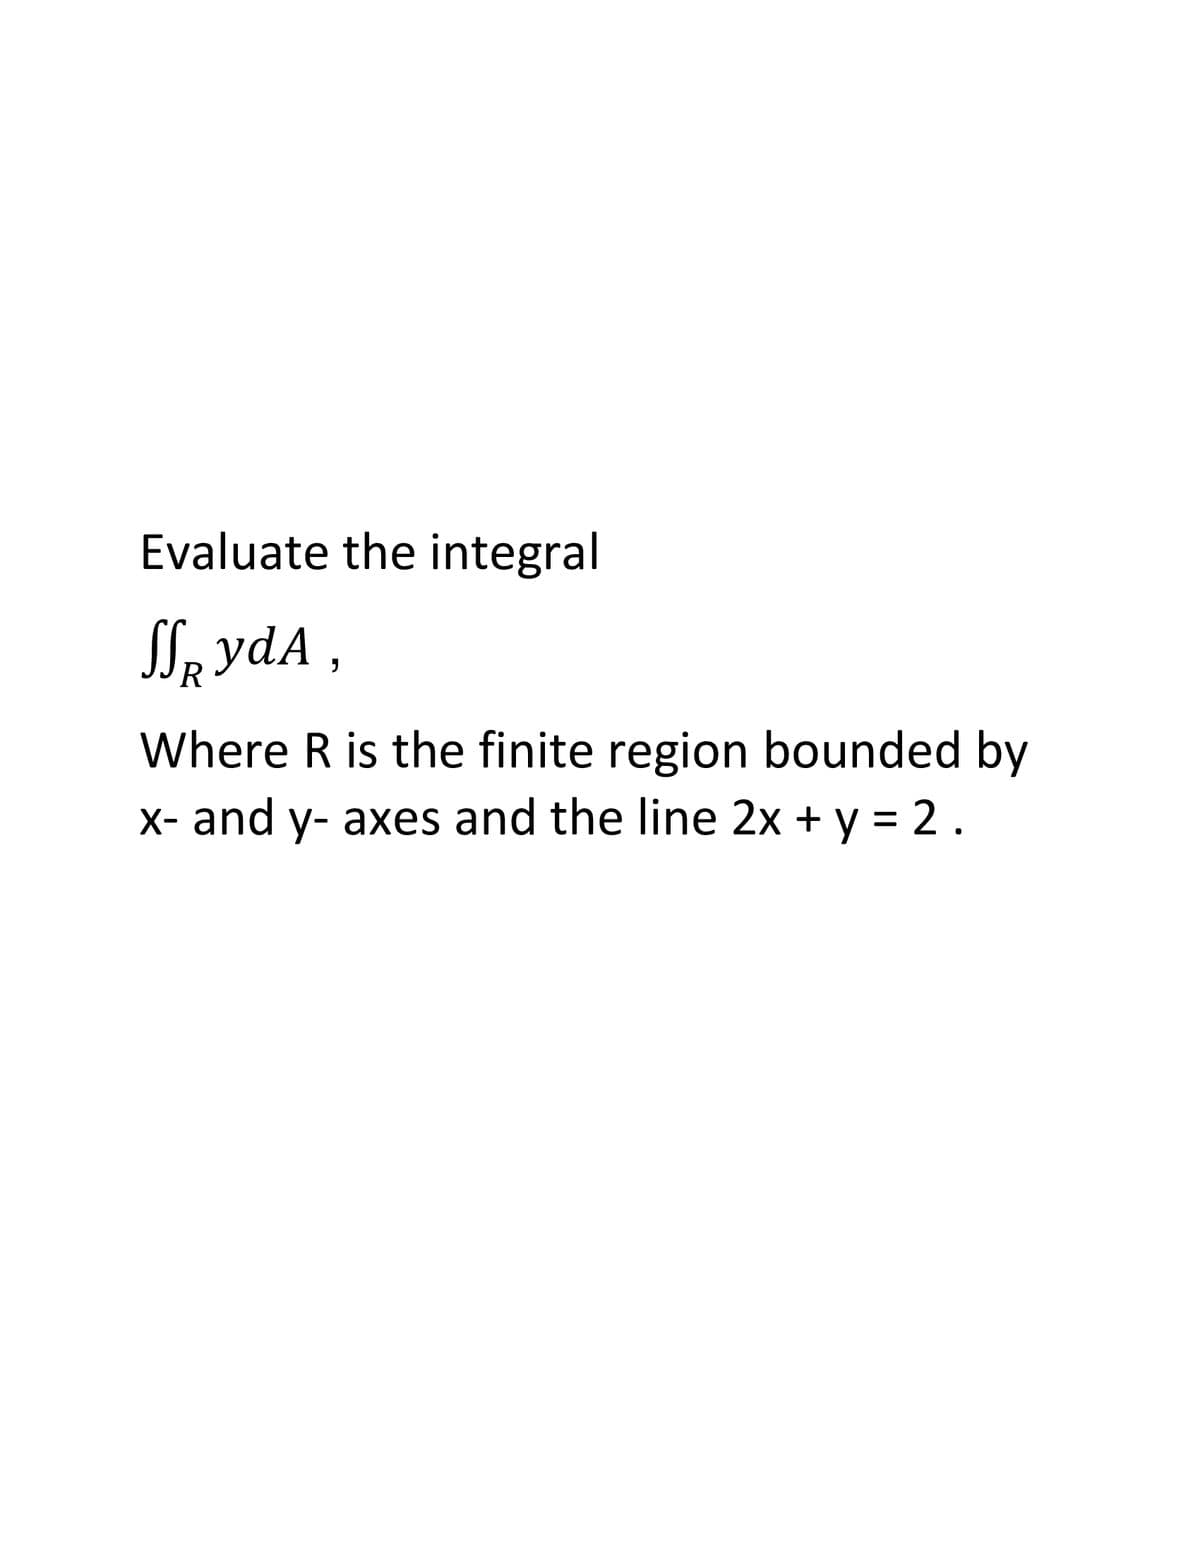 Evaluate the integral
SIe ydA ,
R
Where R is the finite region bounded by
X- and y- axes and the line 2x + y = 2.
%3D
